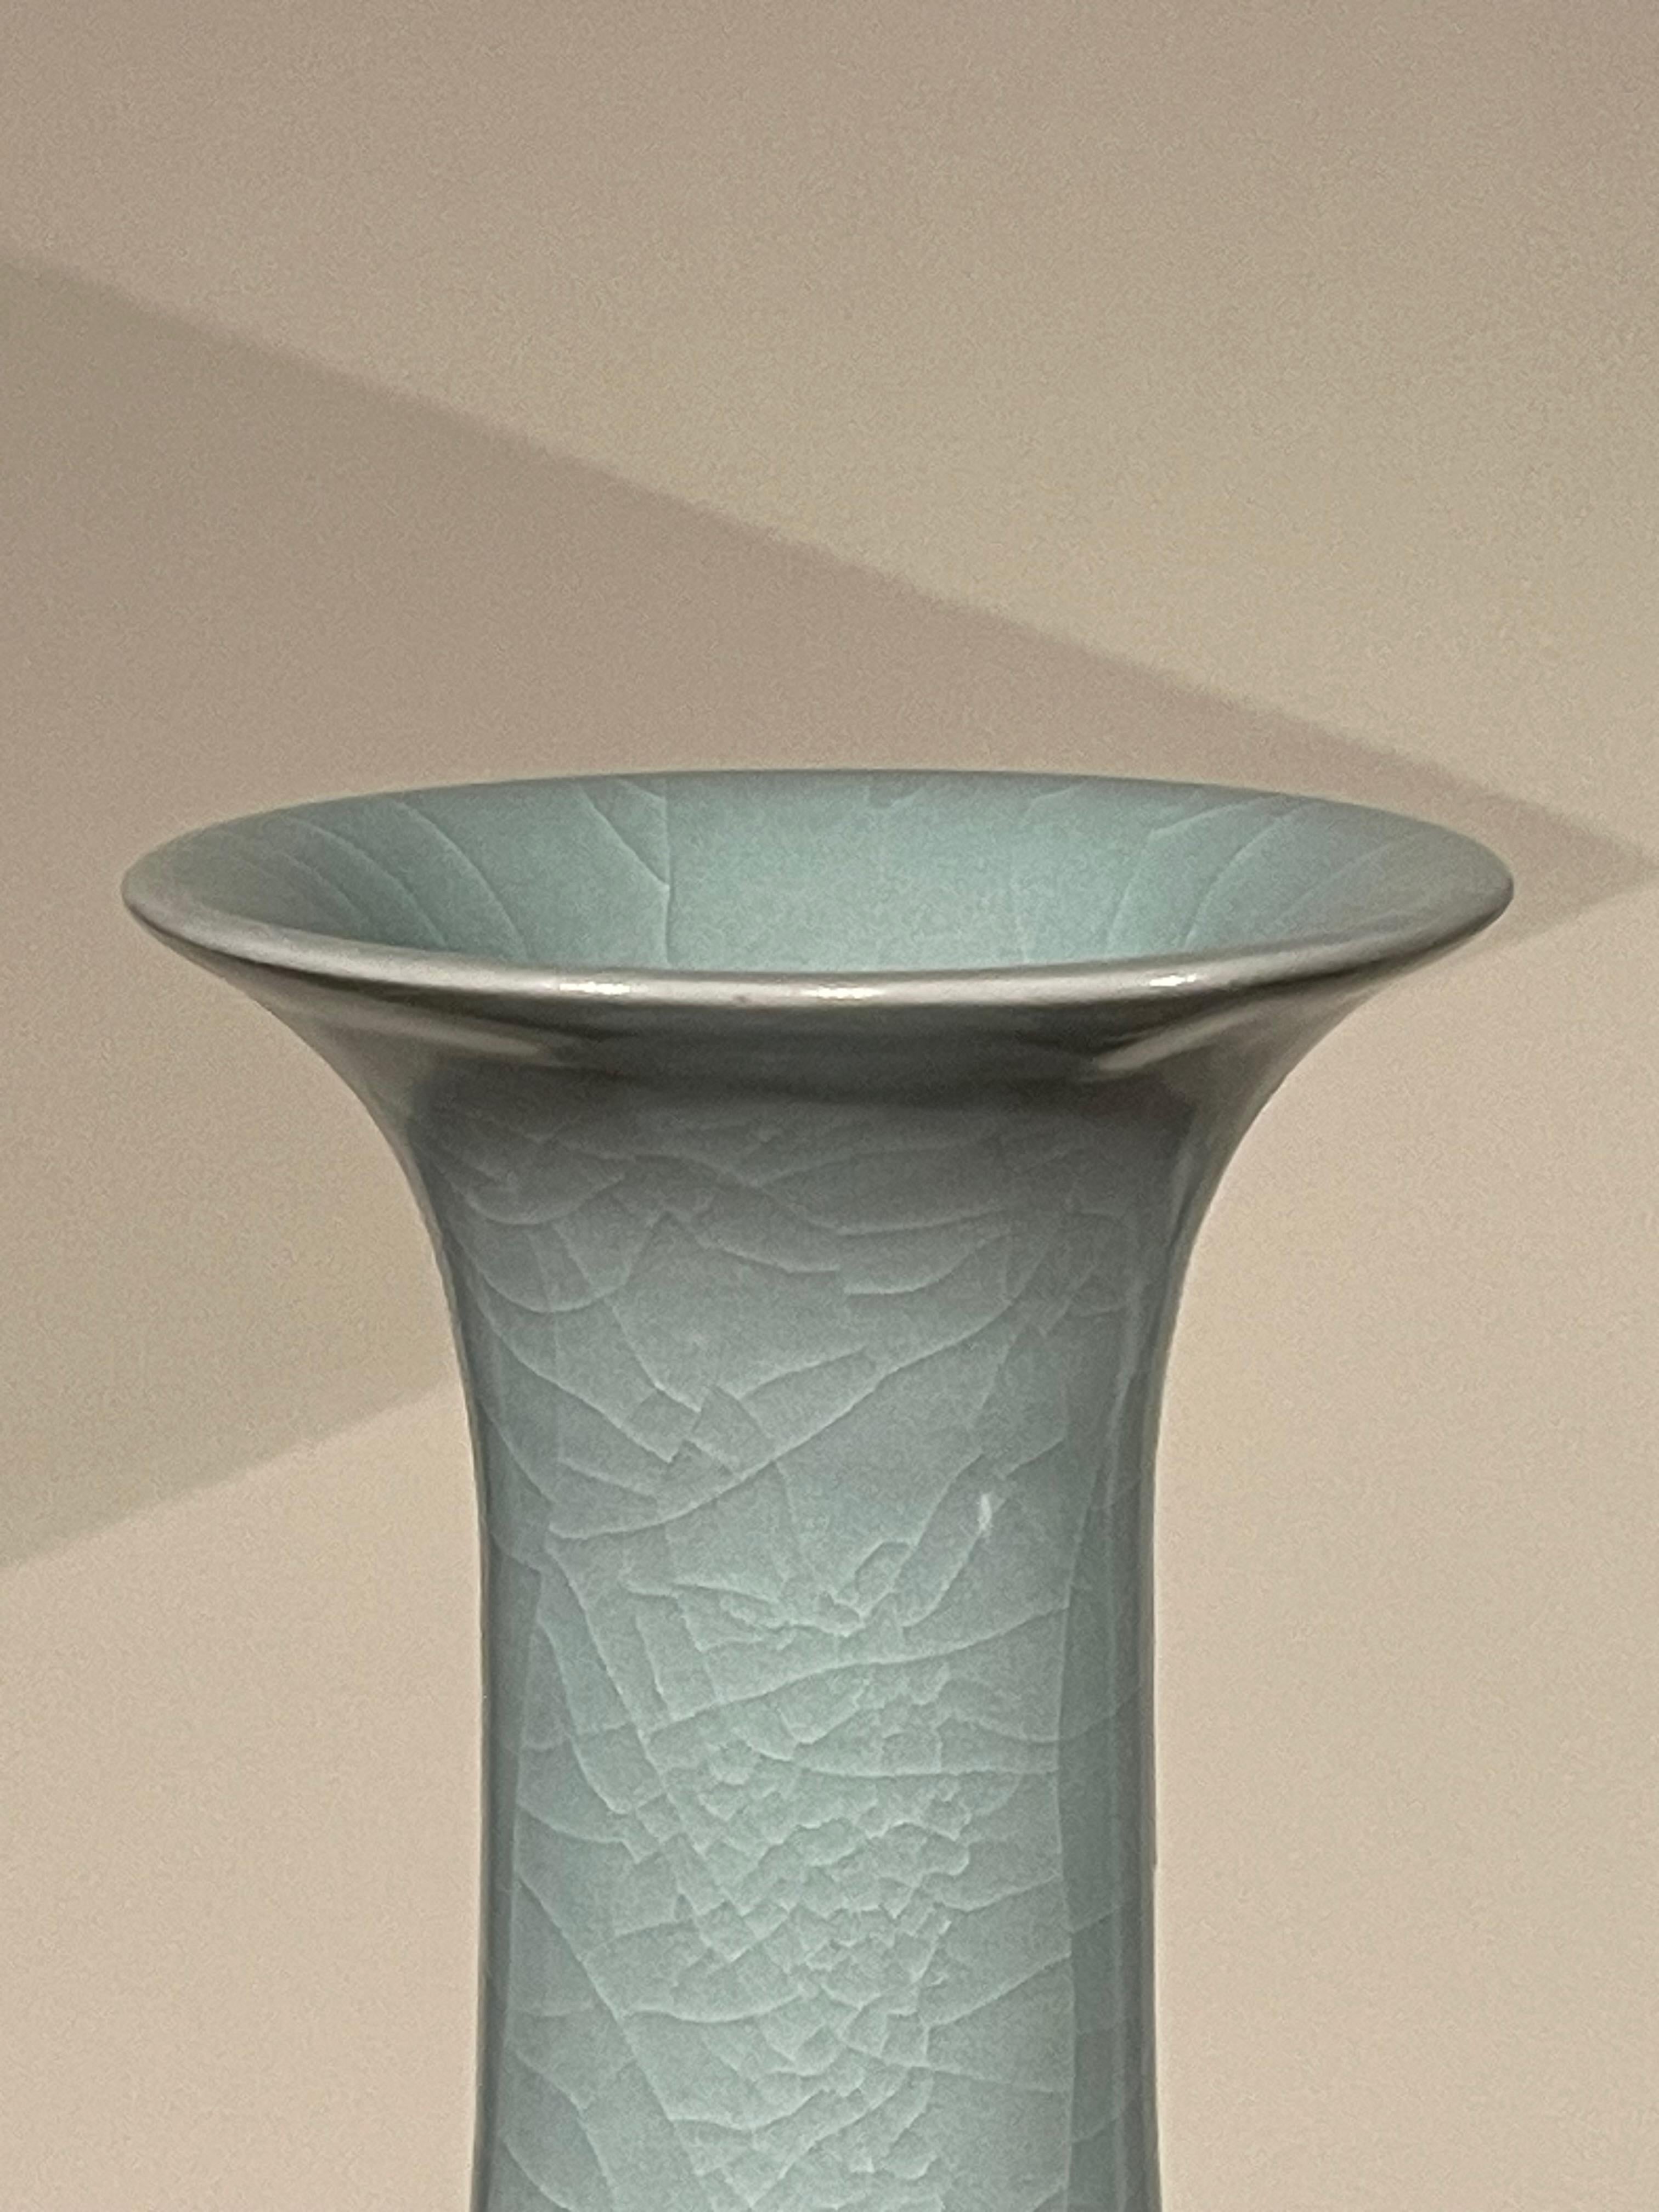 Contemporary Chinese pale turquoise vase.
Tulip shape with rounded bottom.
Large collection available with varying sizes and shapes.
Sold individually.
ARRIVING MARCH